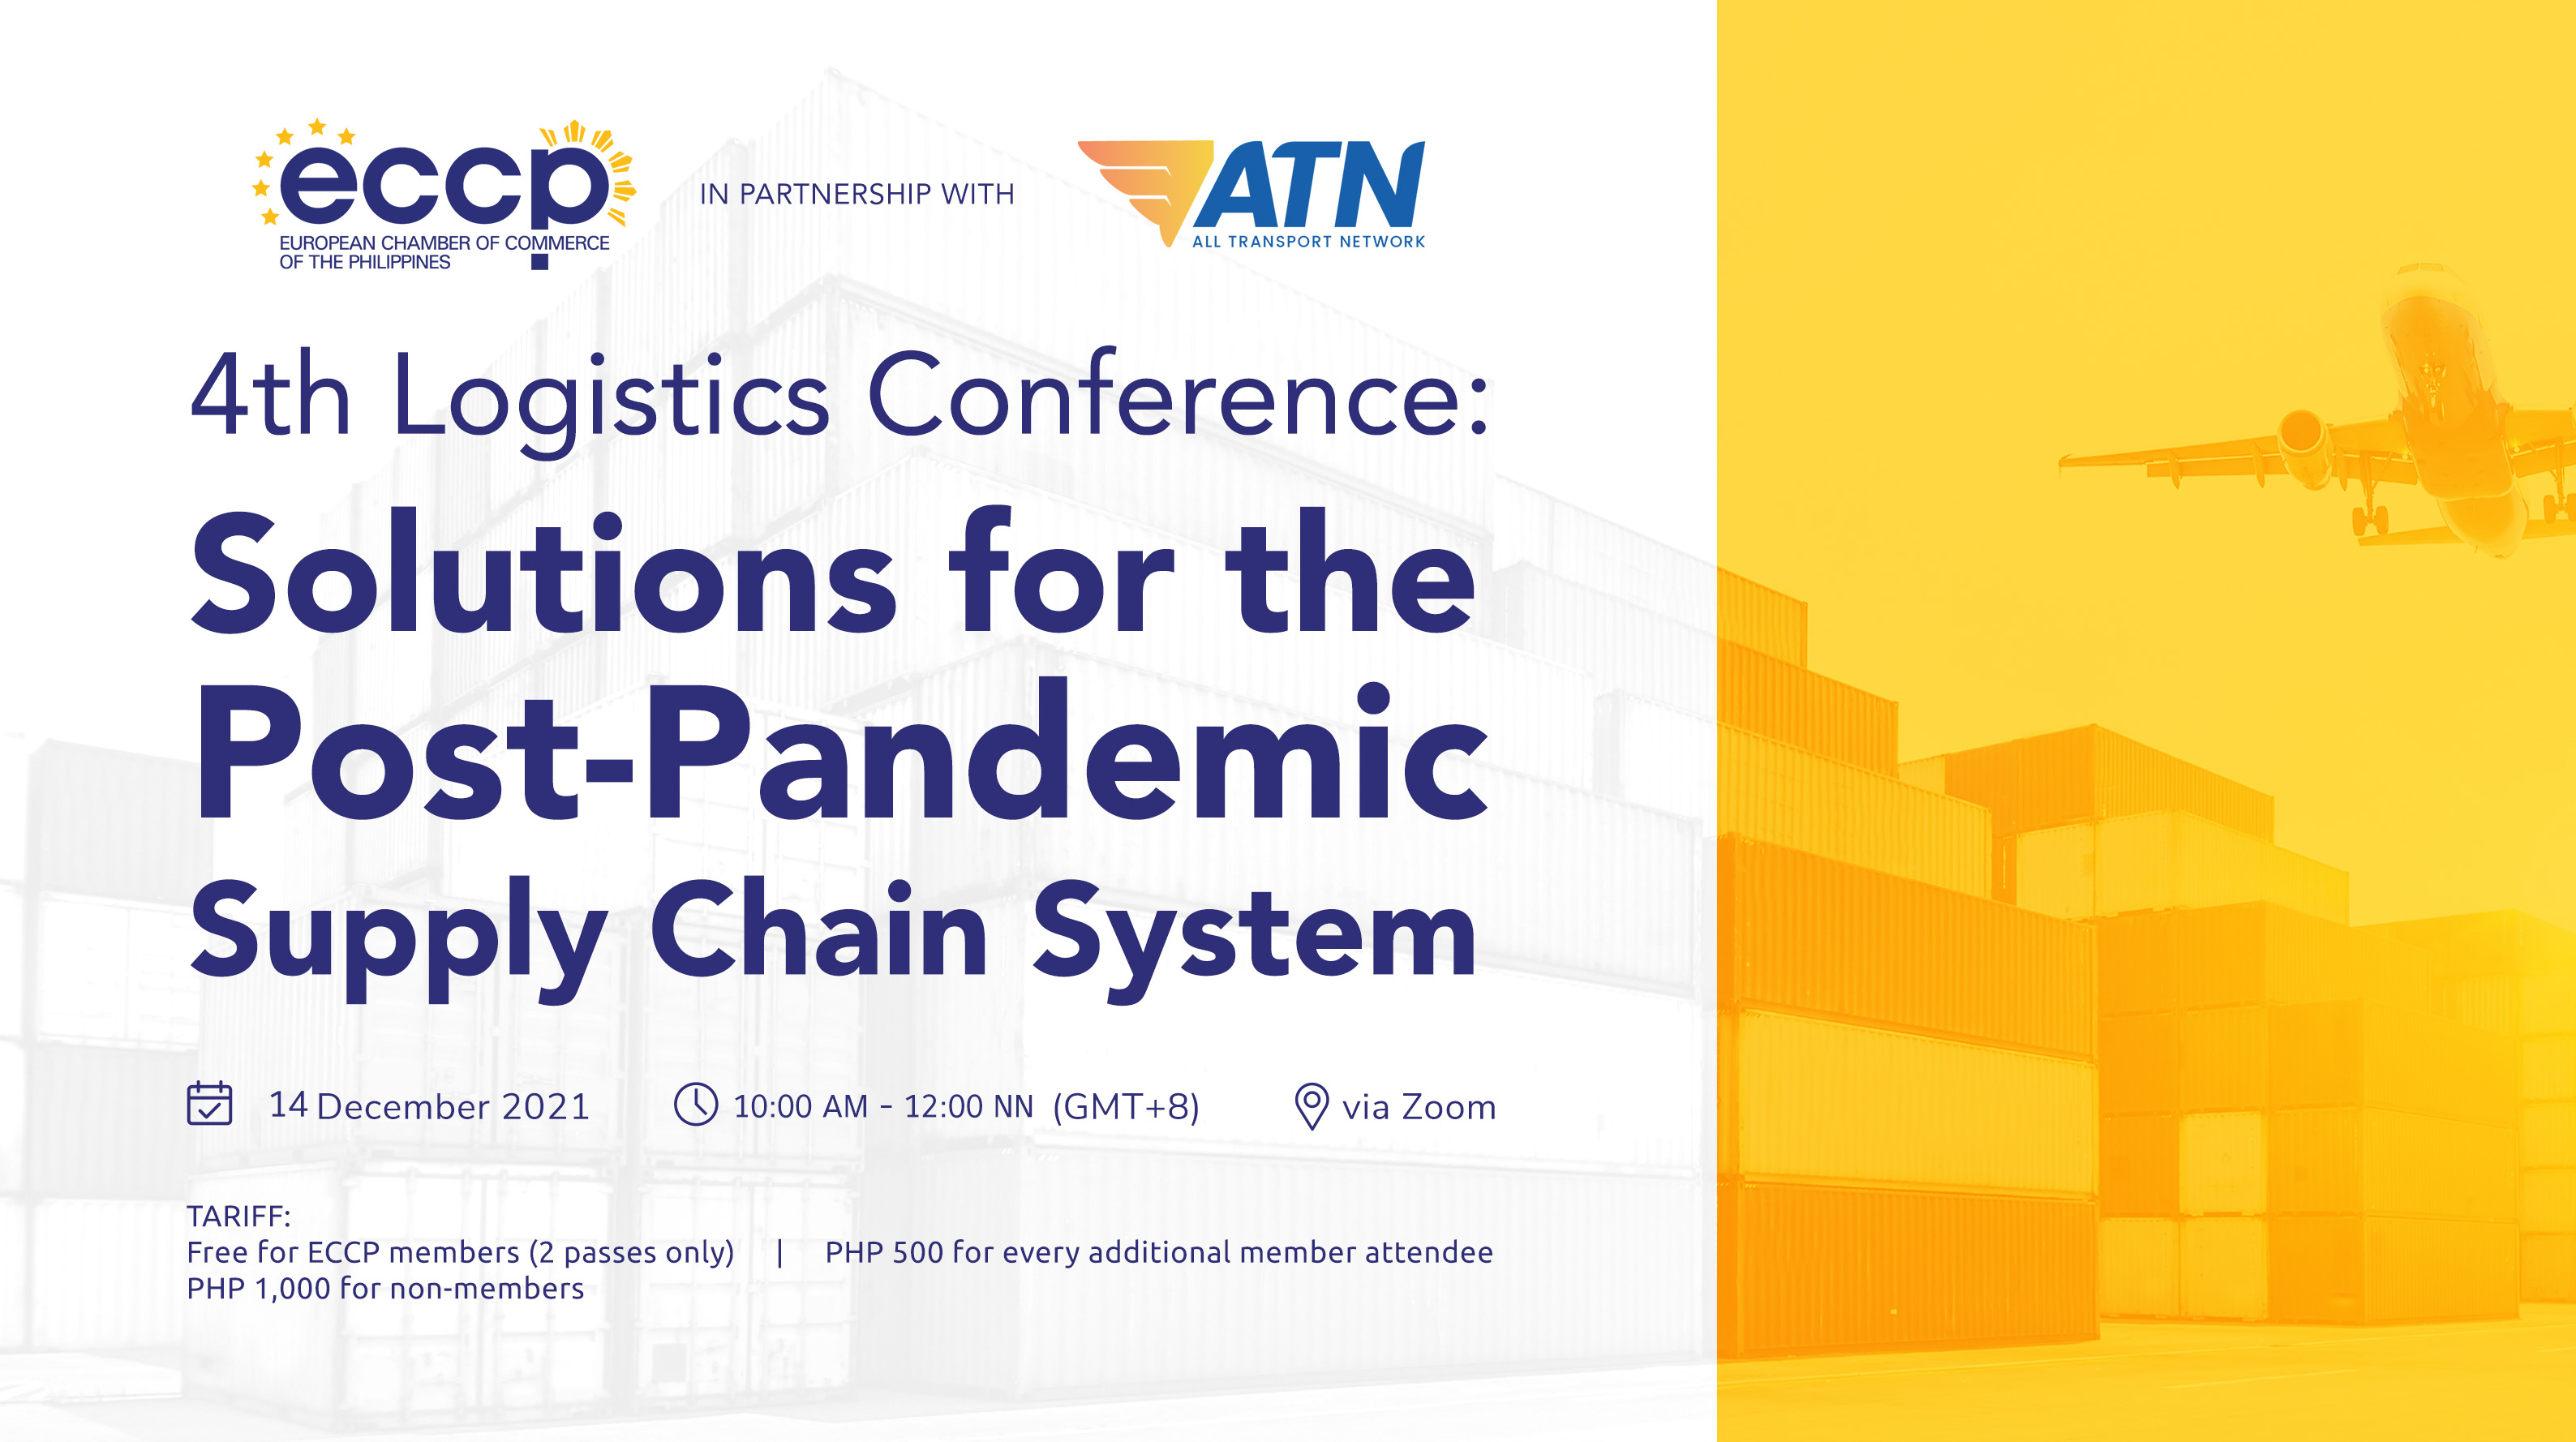 4th Logistics Conference Solutions for PostPandemic Supply Chain System